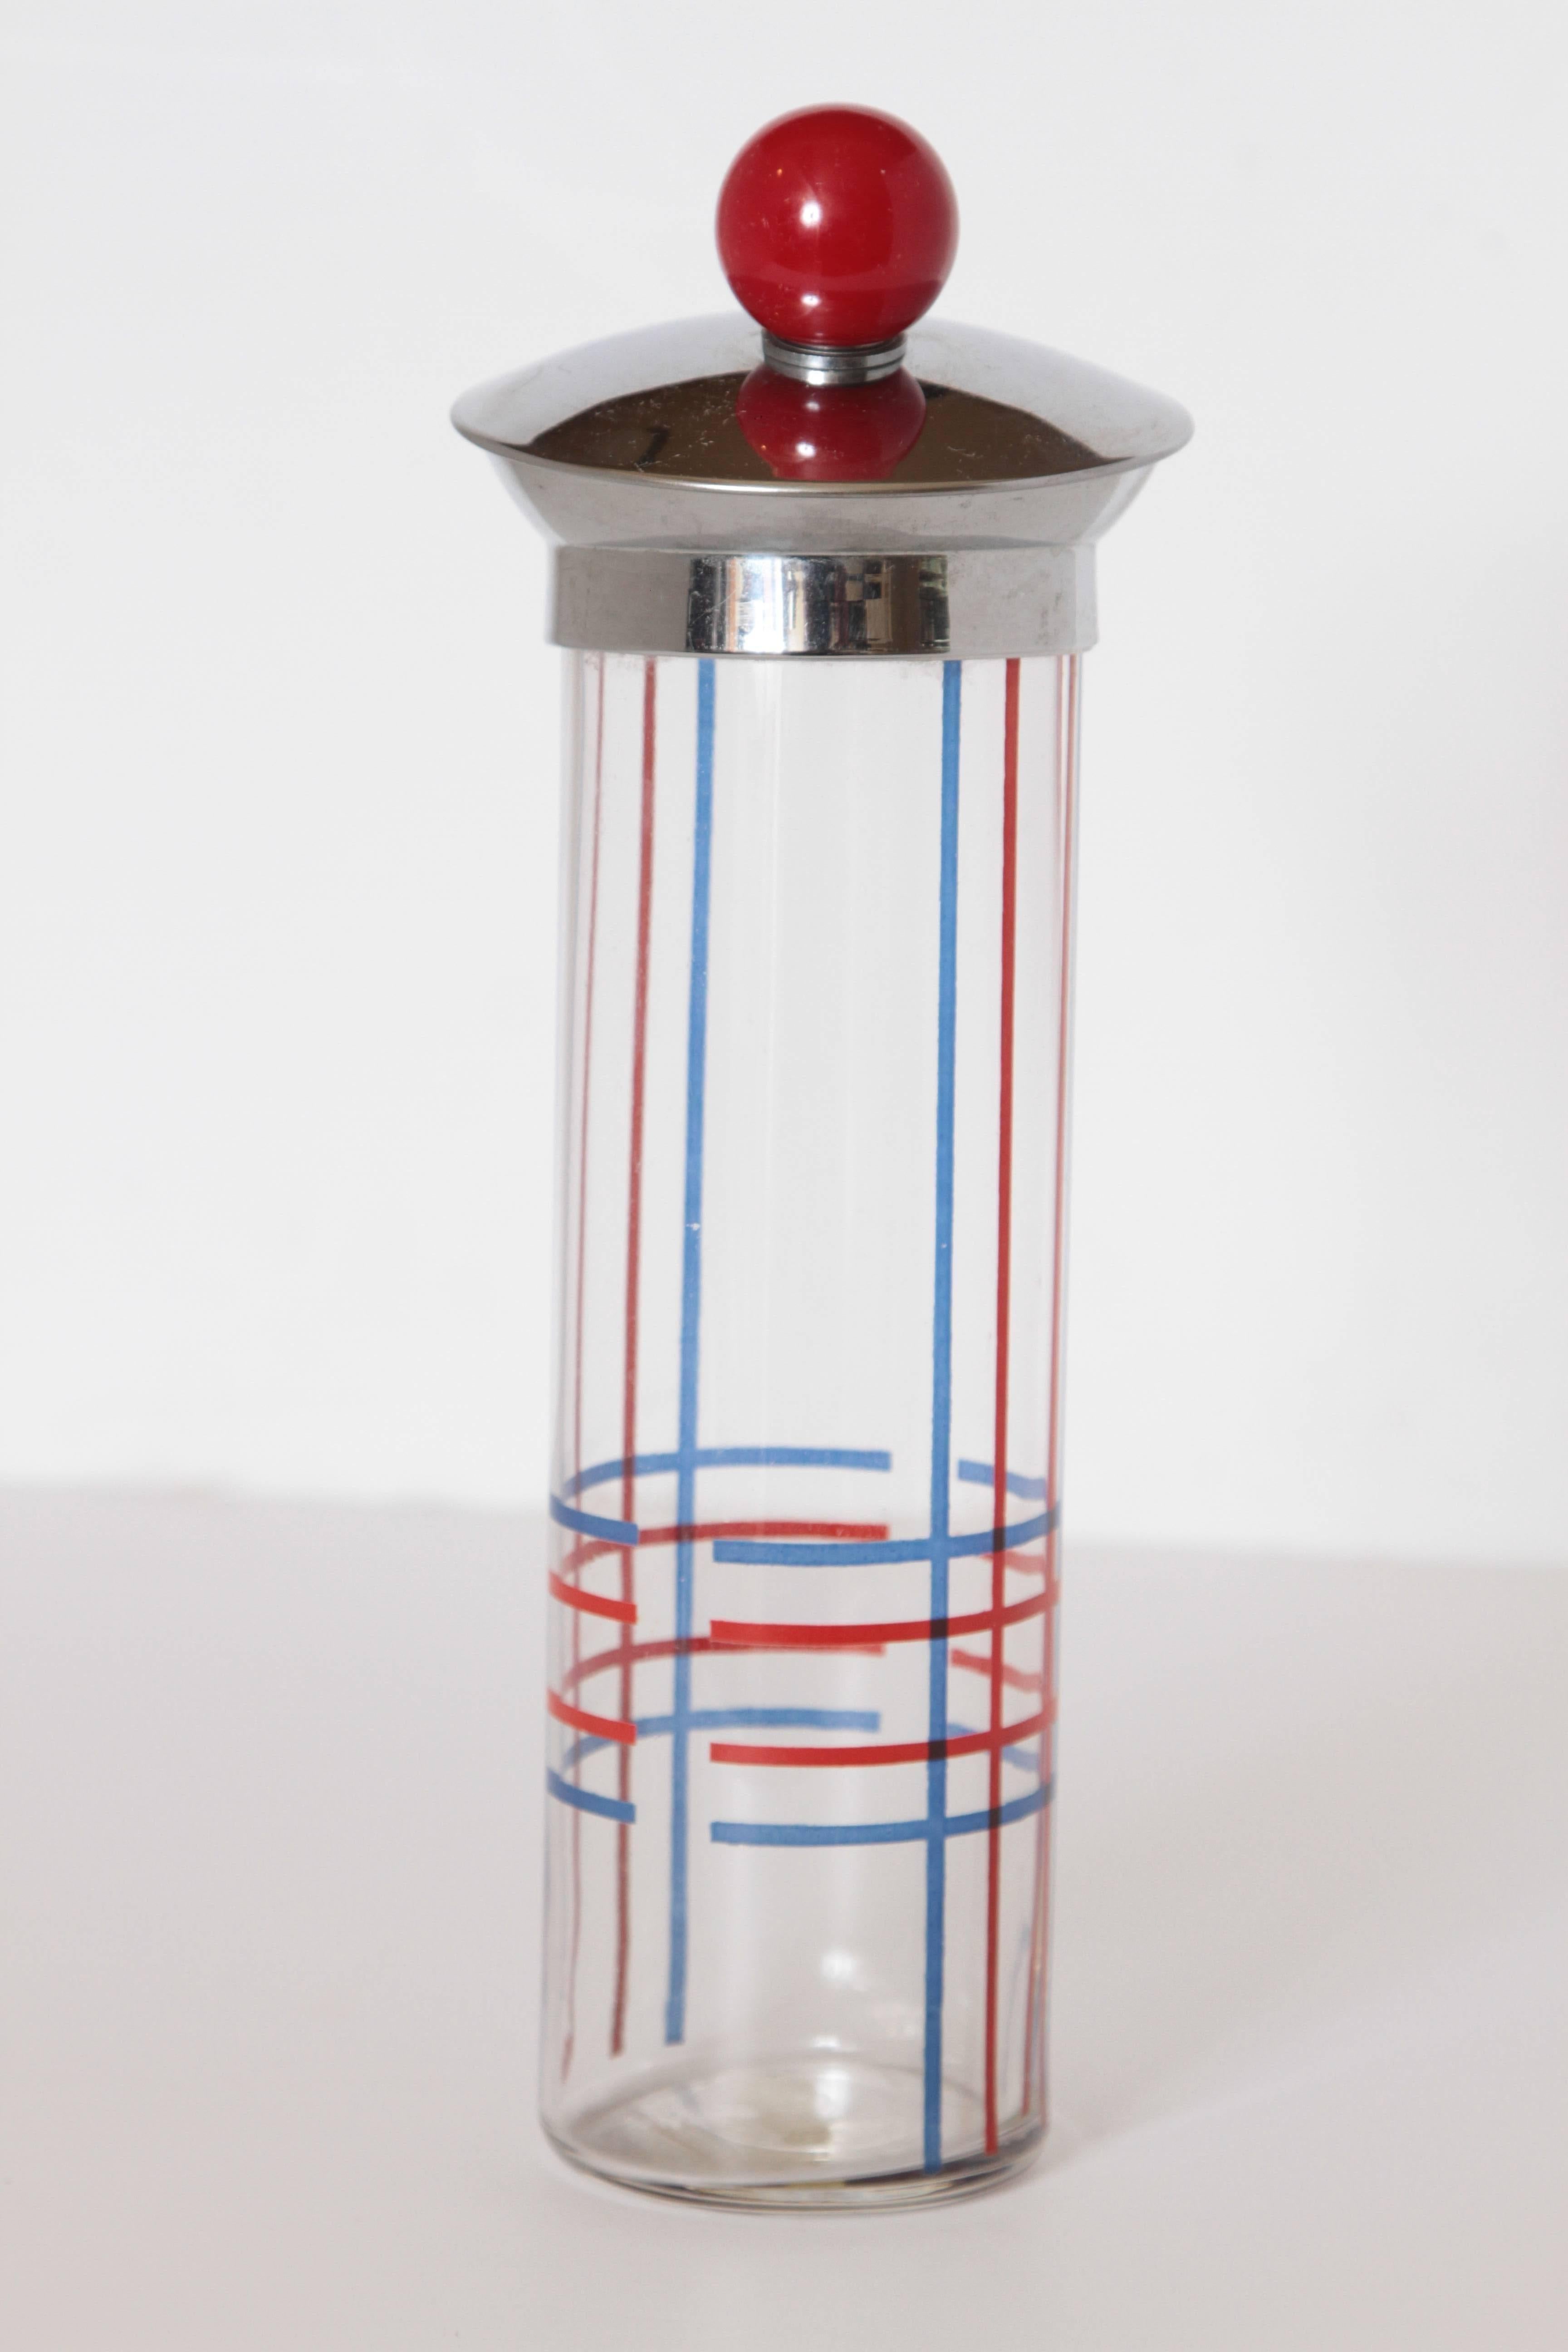 American Art Deco Cocktail Shaker, Patented Design, Tam-O-Shaker by Seymour Products